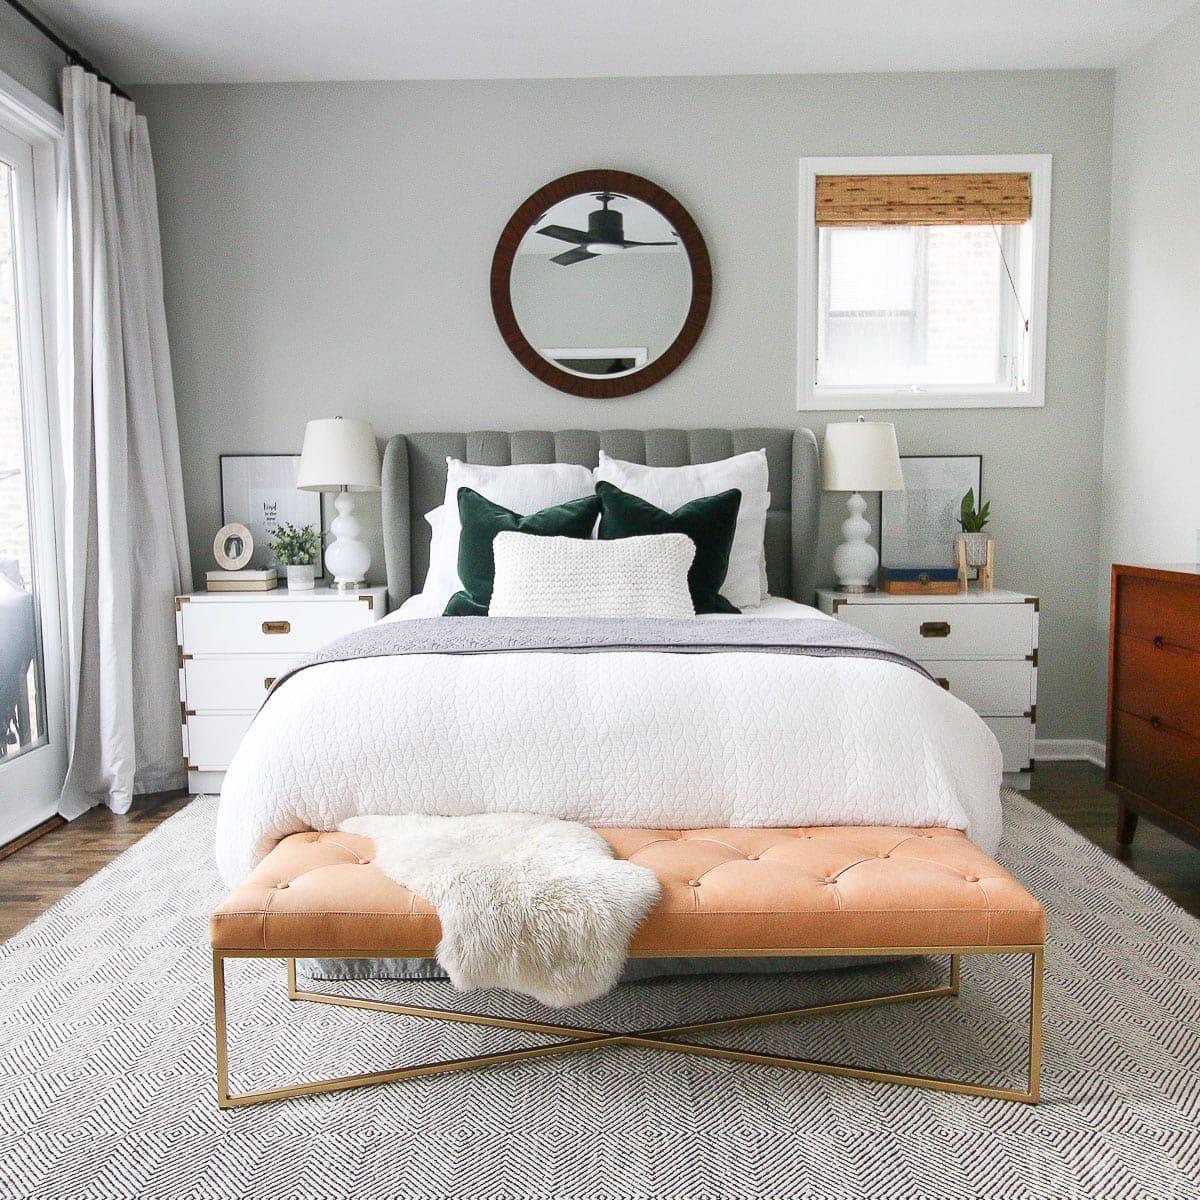 We loved the new gel mattress so much that we changed it to the master bedroom